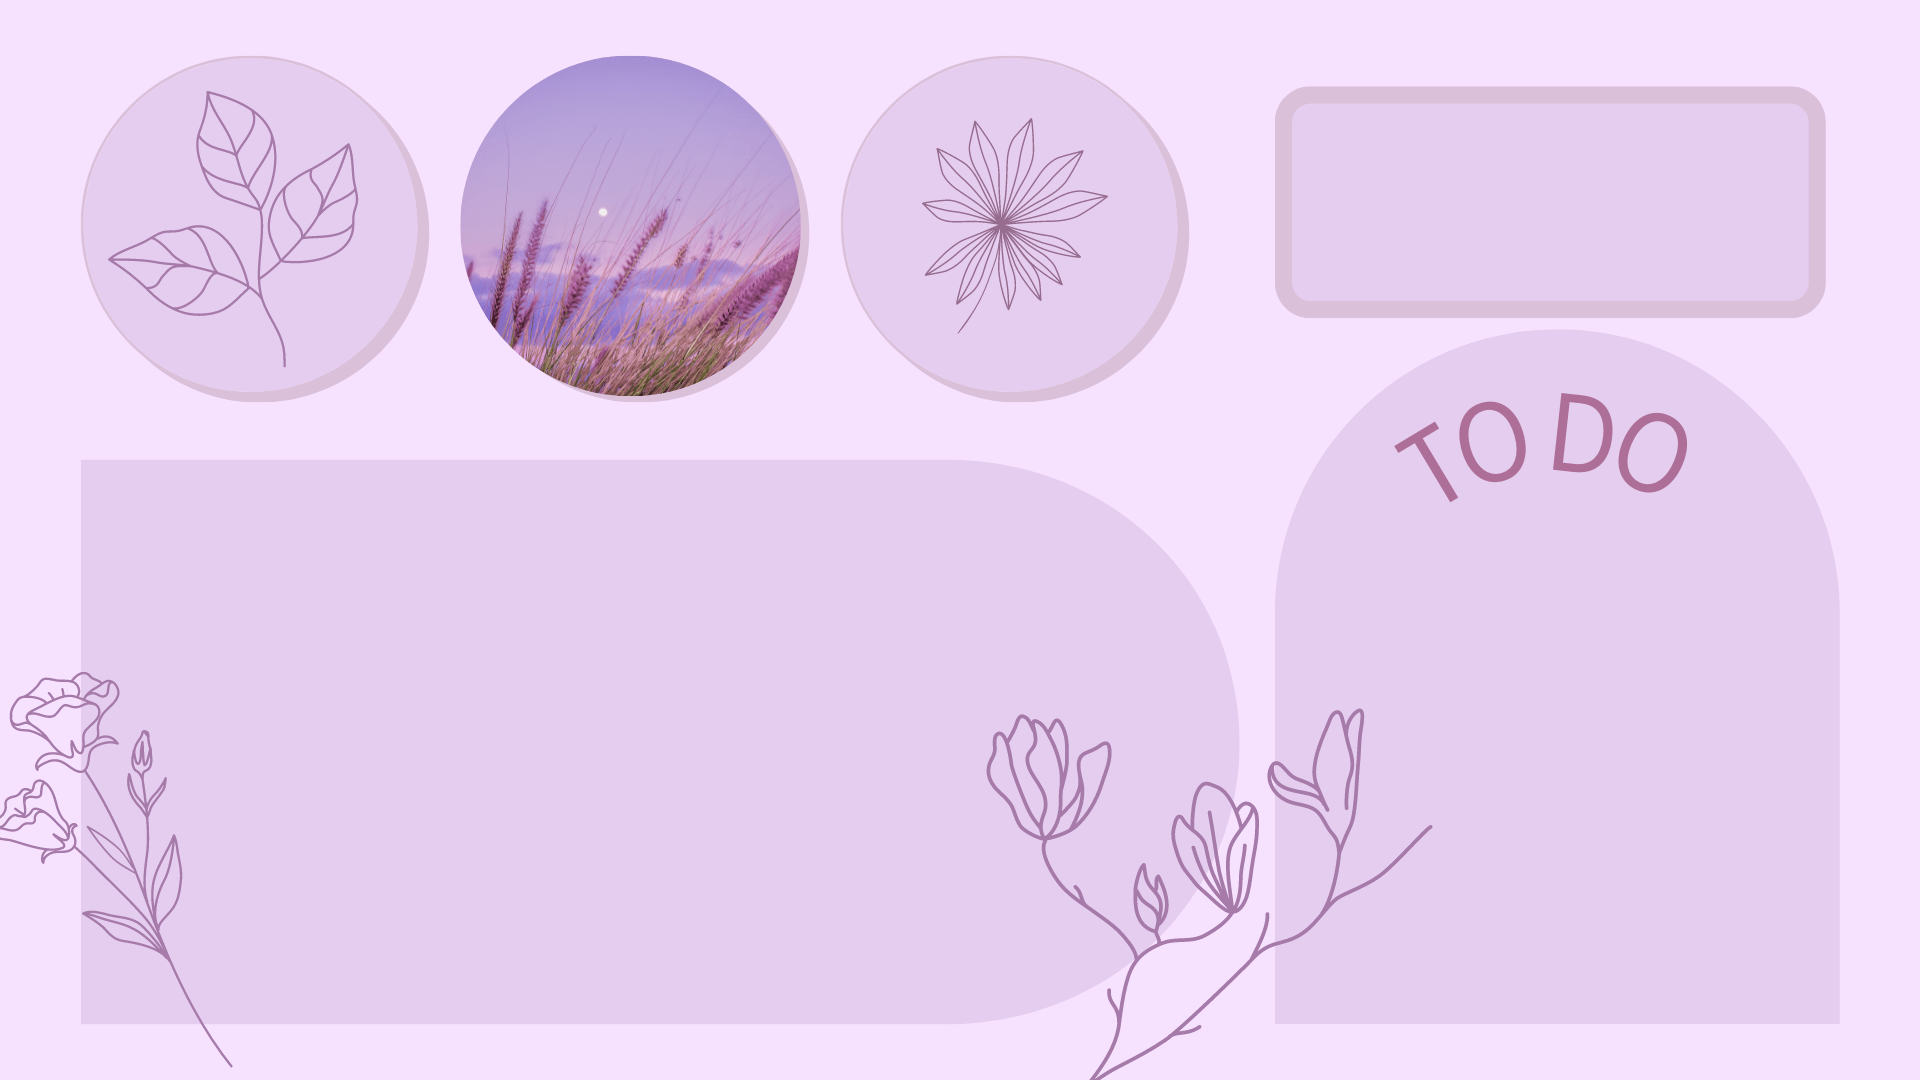 A template for a social media post with four circles, a note, and two branches with flowers. - Desktop, computer